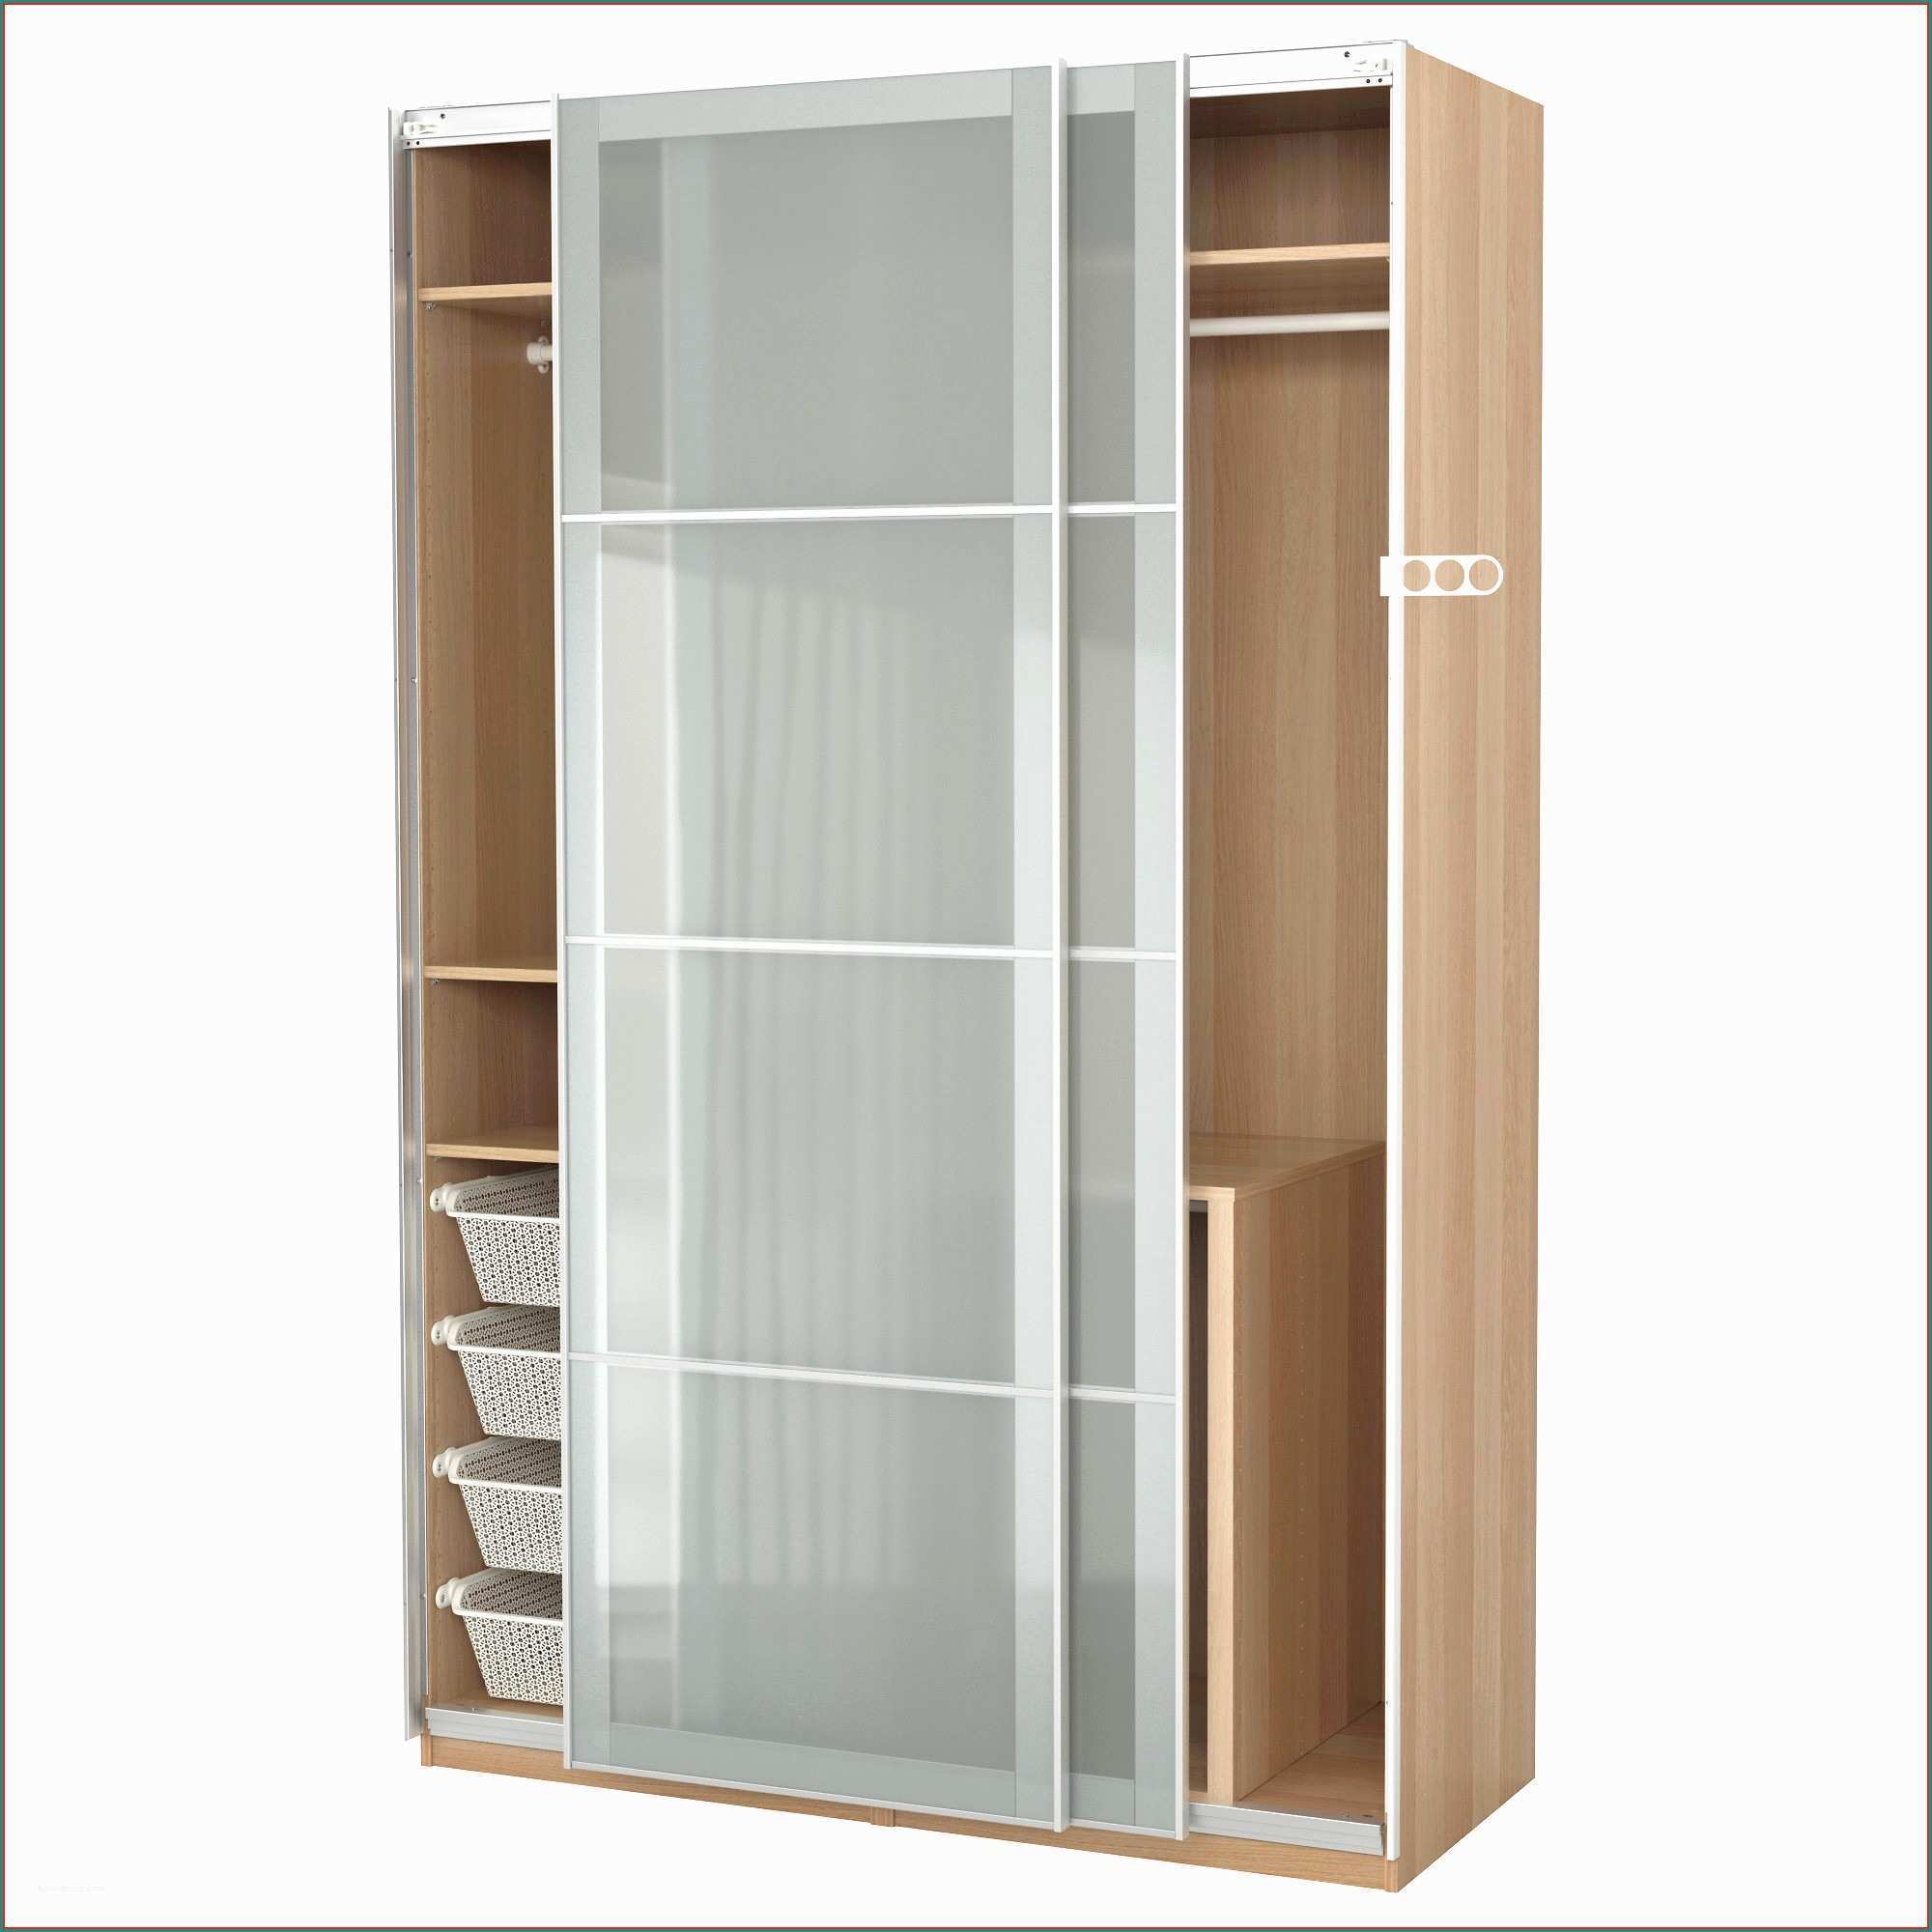 Ringhiere Per Scale Interne Leroy Merlin E Terrazo Exterior Leroy Merlin Gallery Perfect S